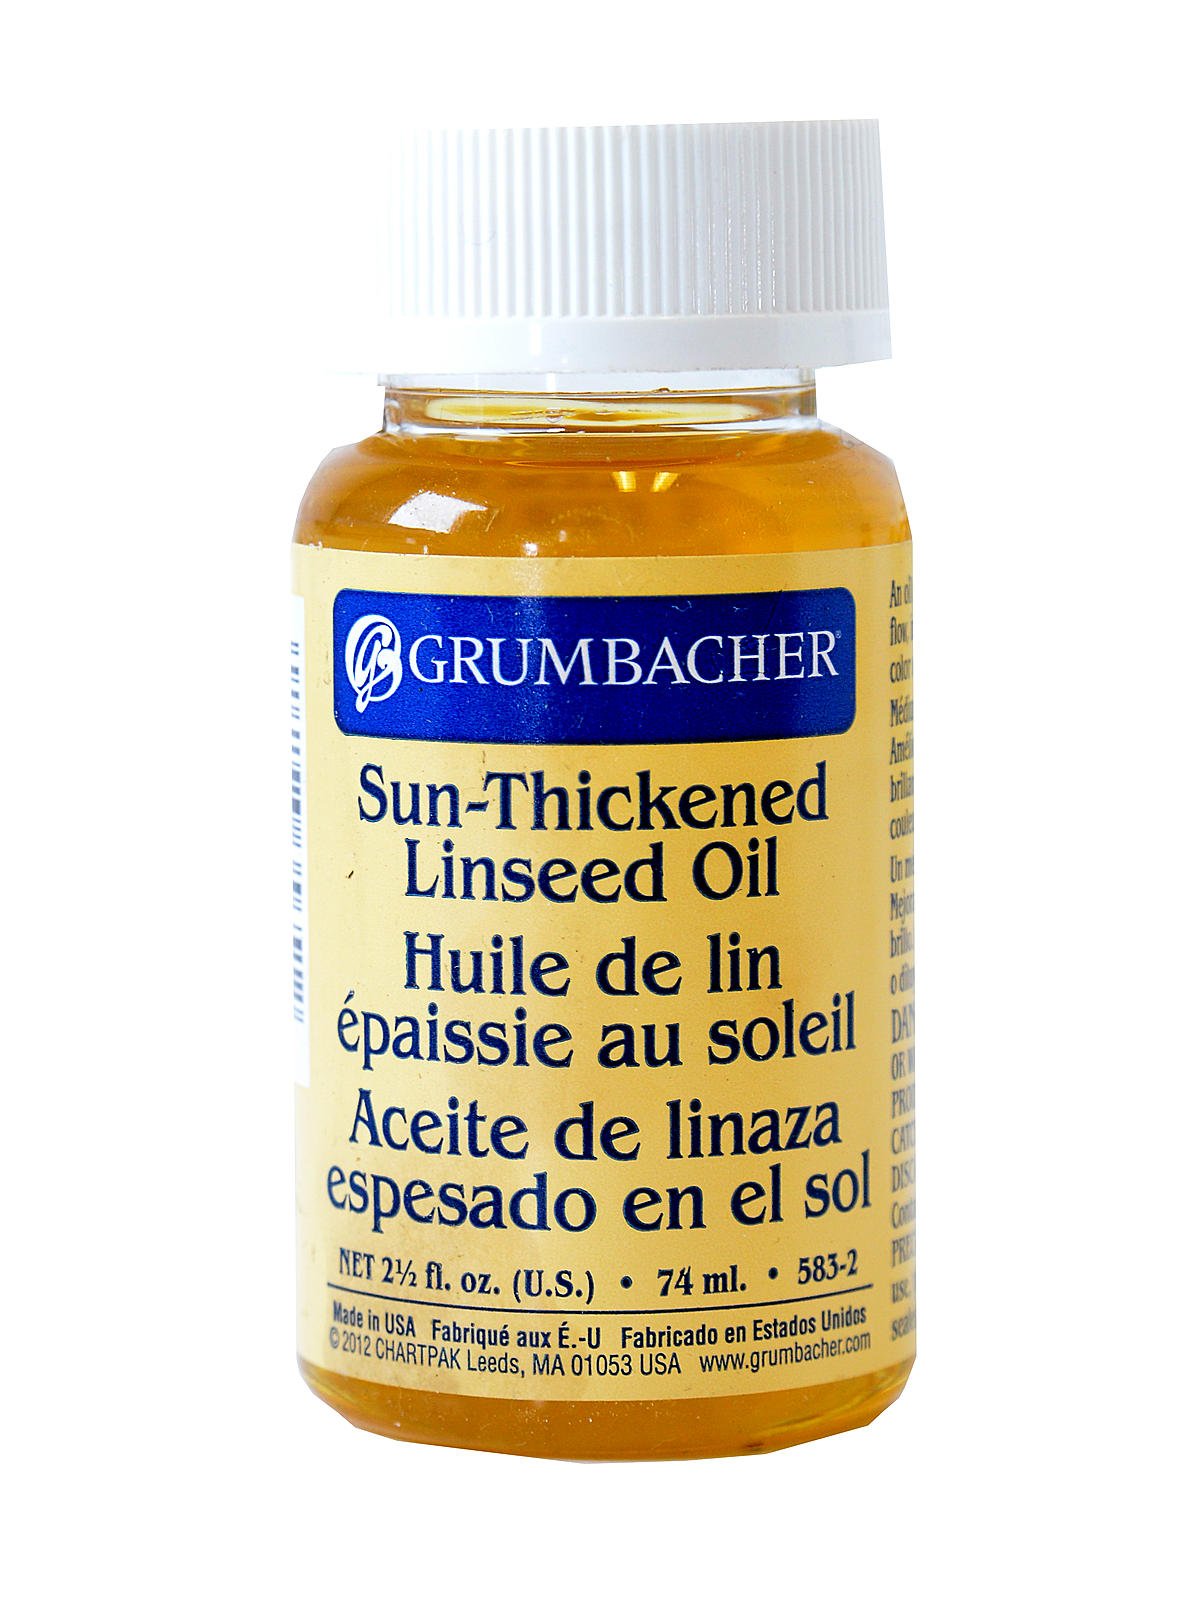 Grumbacher - Sun-Thickened Linseed Oil